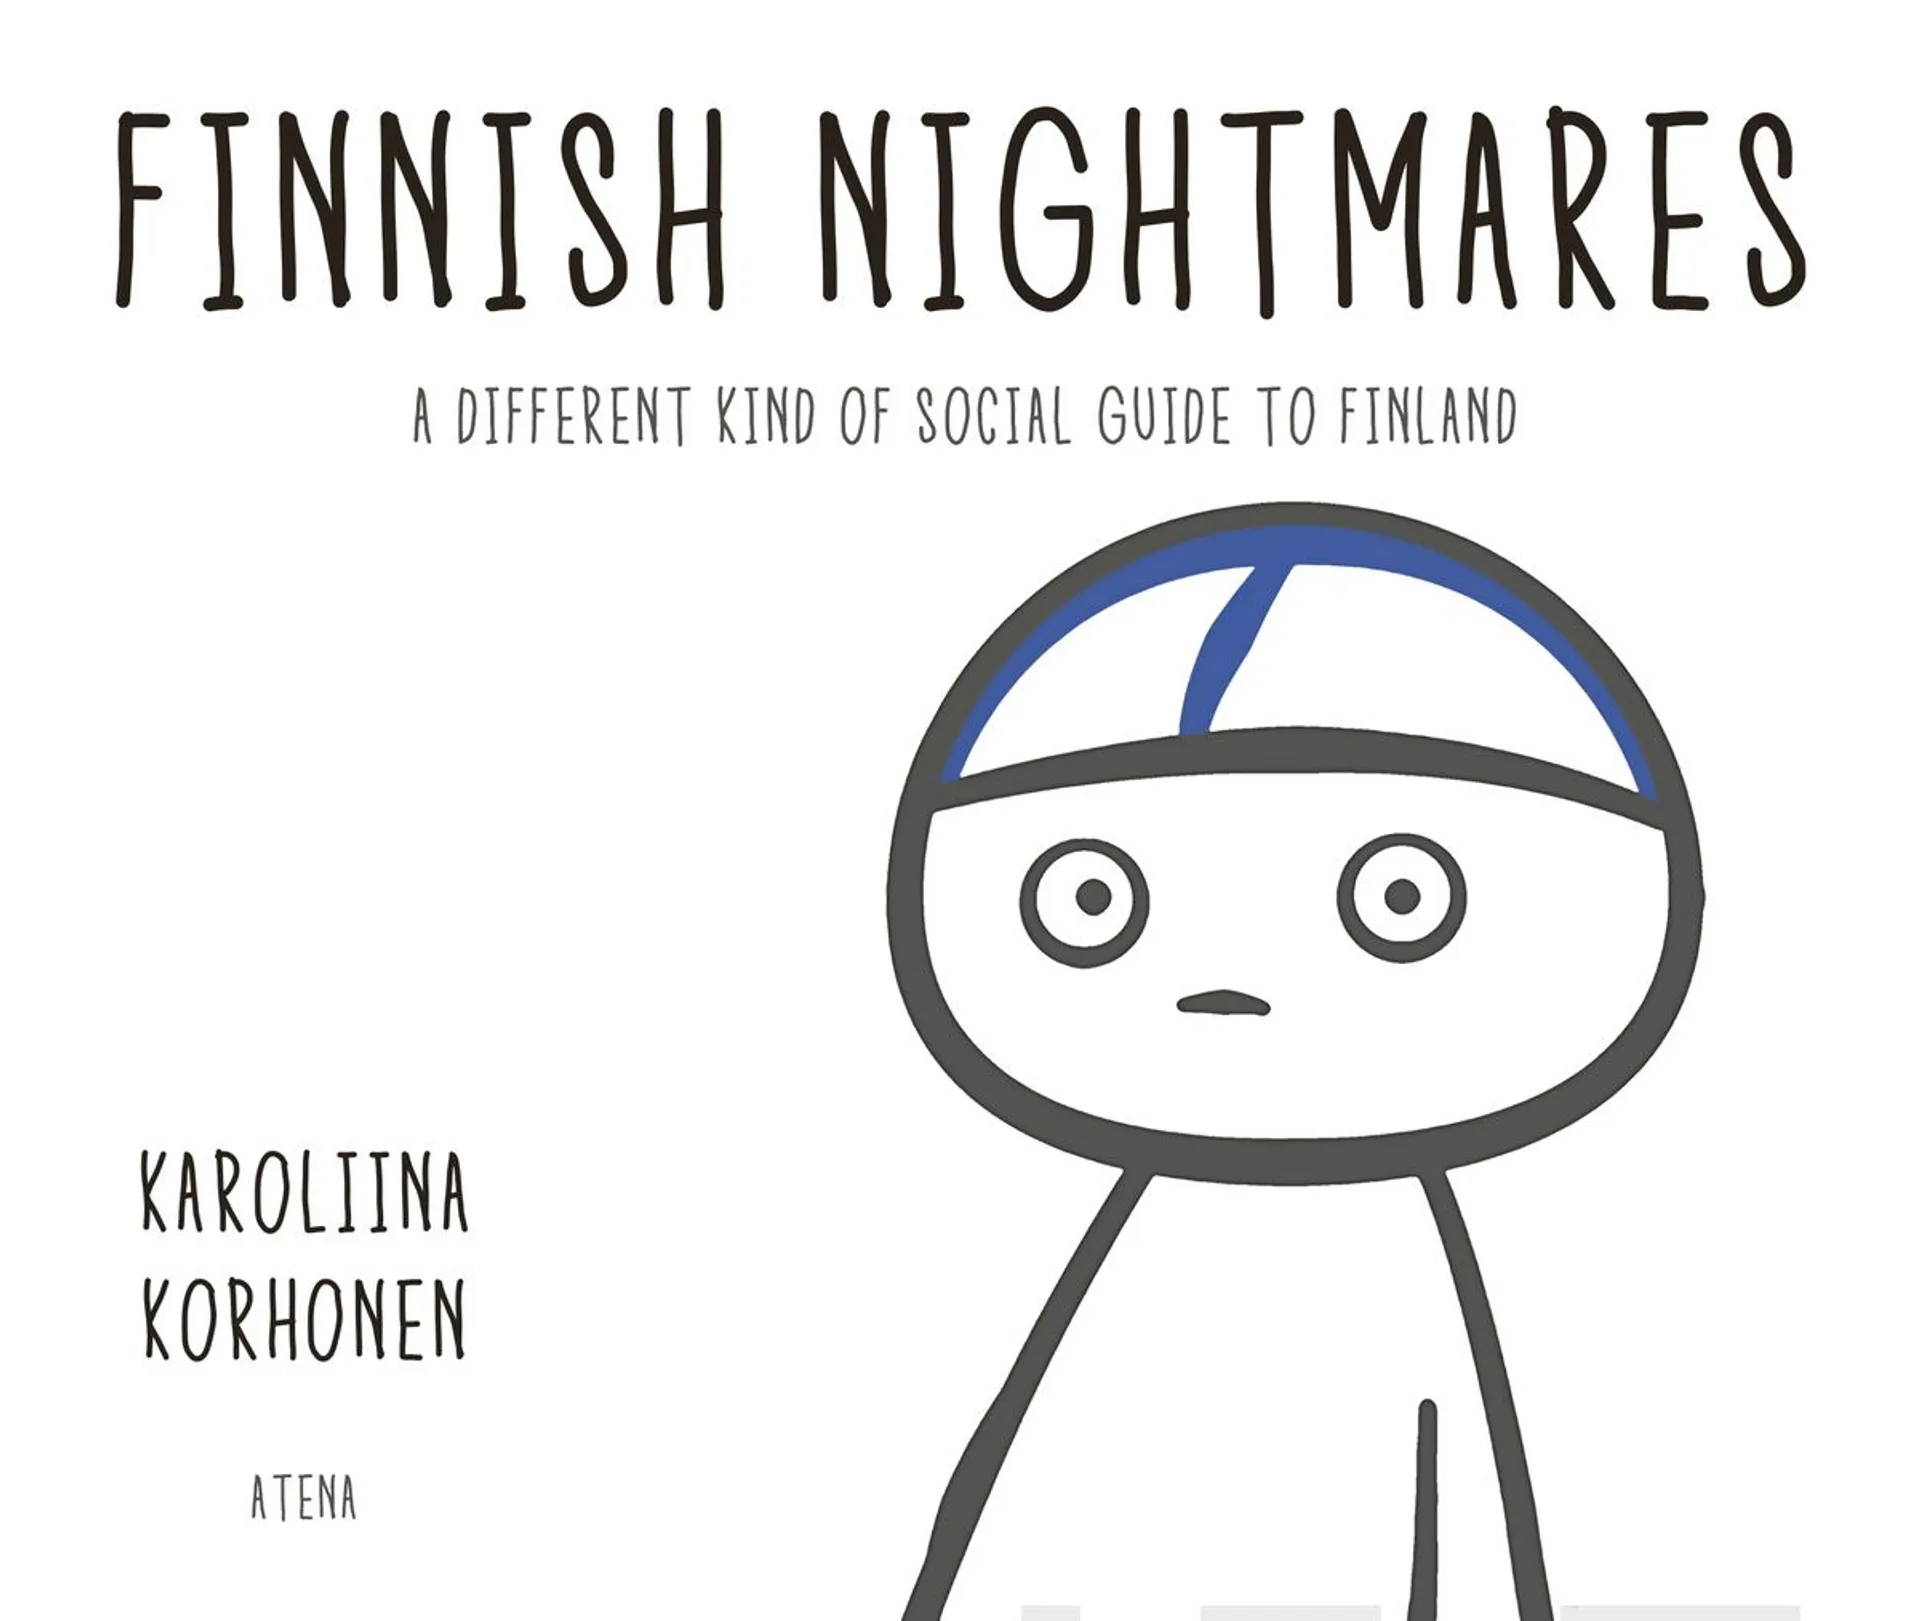 Korhonen, Finnish Nightmares - A Different Kind of Social Guide to Finland